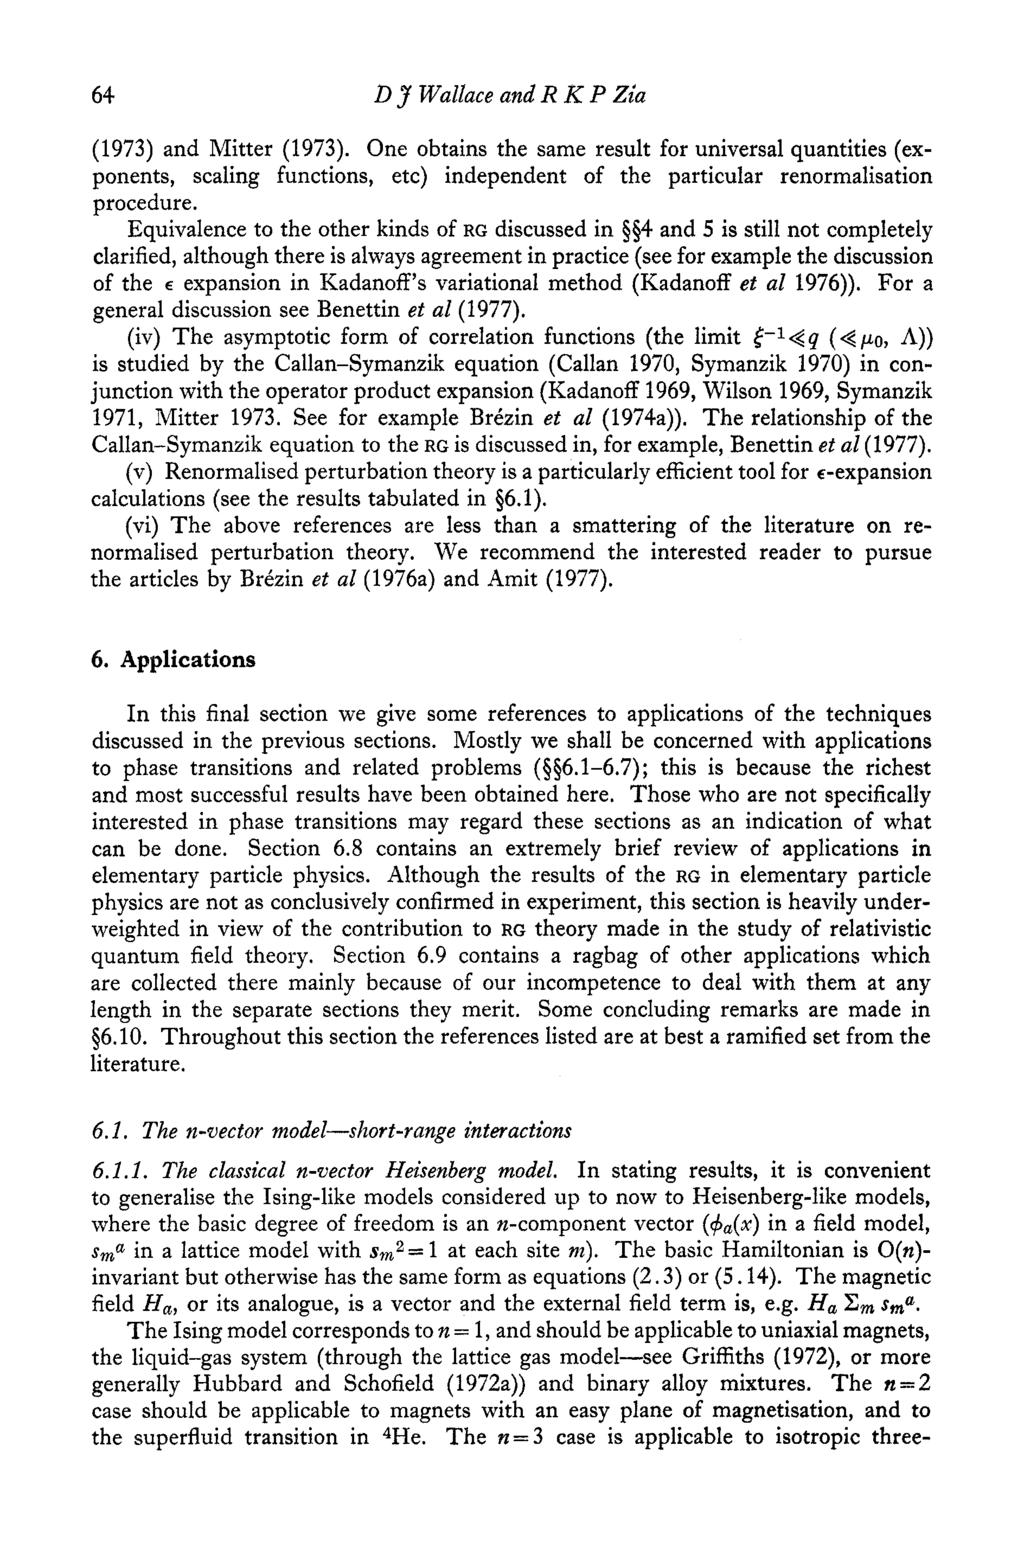 64 D J Wallace and R K P Zia (1973) and Mitter (1973). One obtains the same result for universal quantities (exponents, scaling functions, etc) independent of the particular renormalisation procedure.